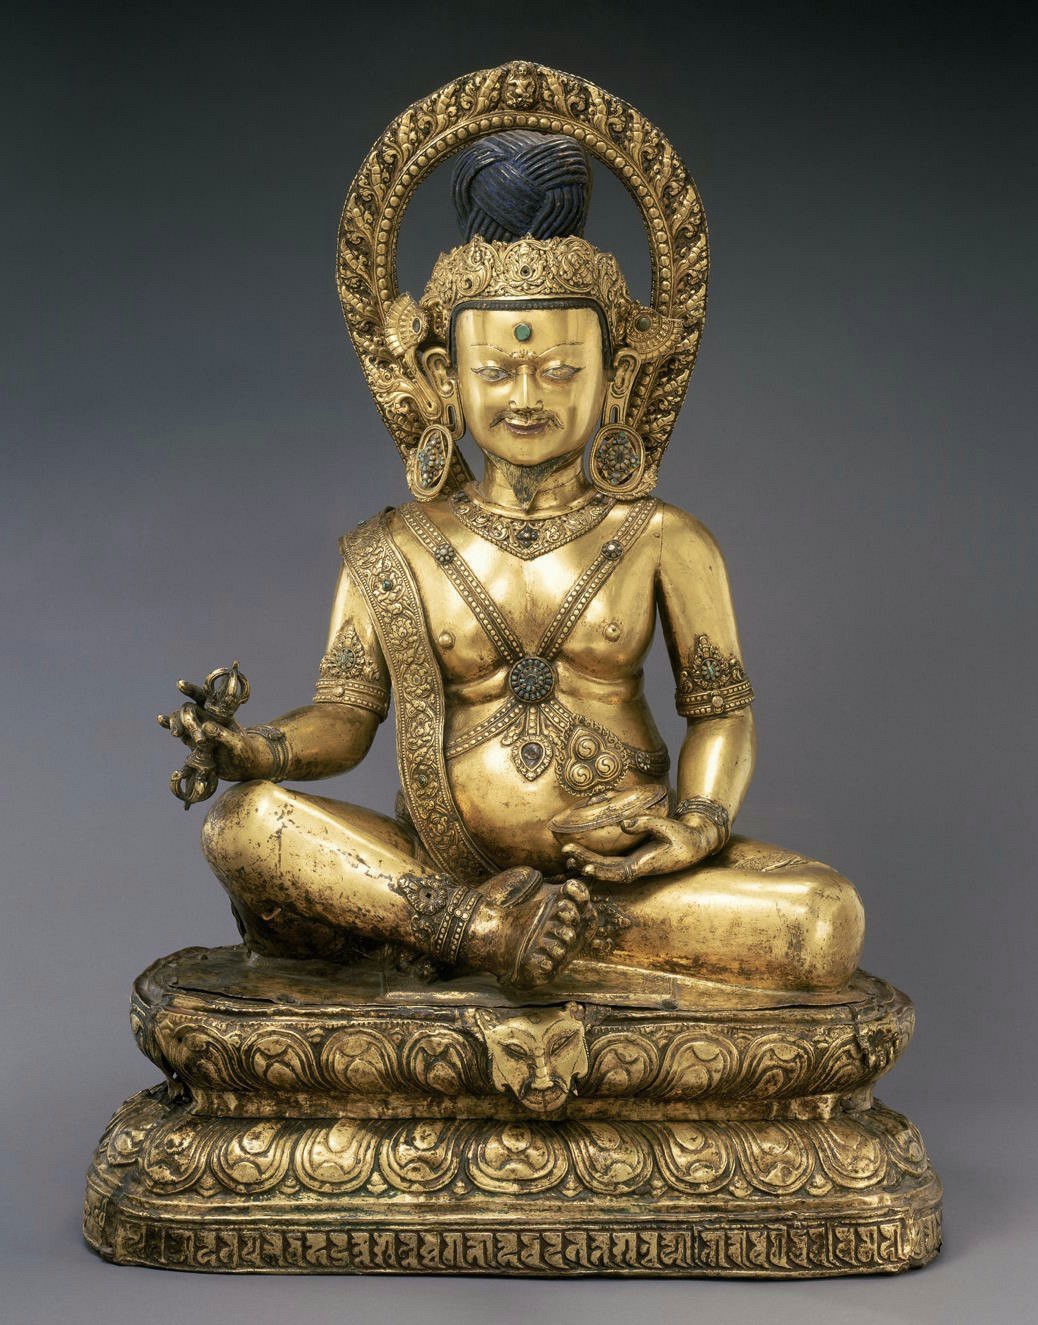 Golden statue depicting “religious madman” featuring paunchy midsection, pointed fiery nimbus, and spiritual implements in hands